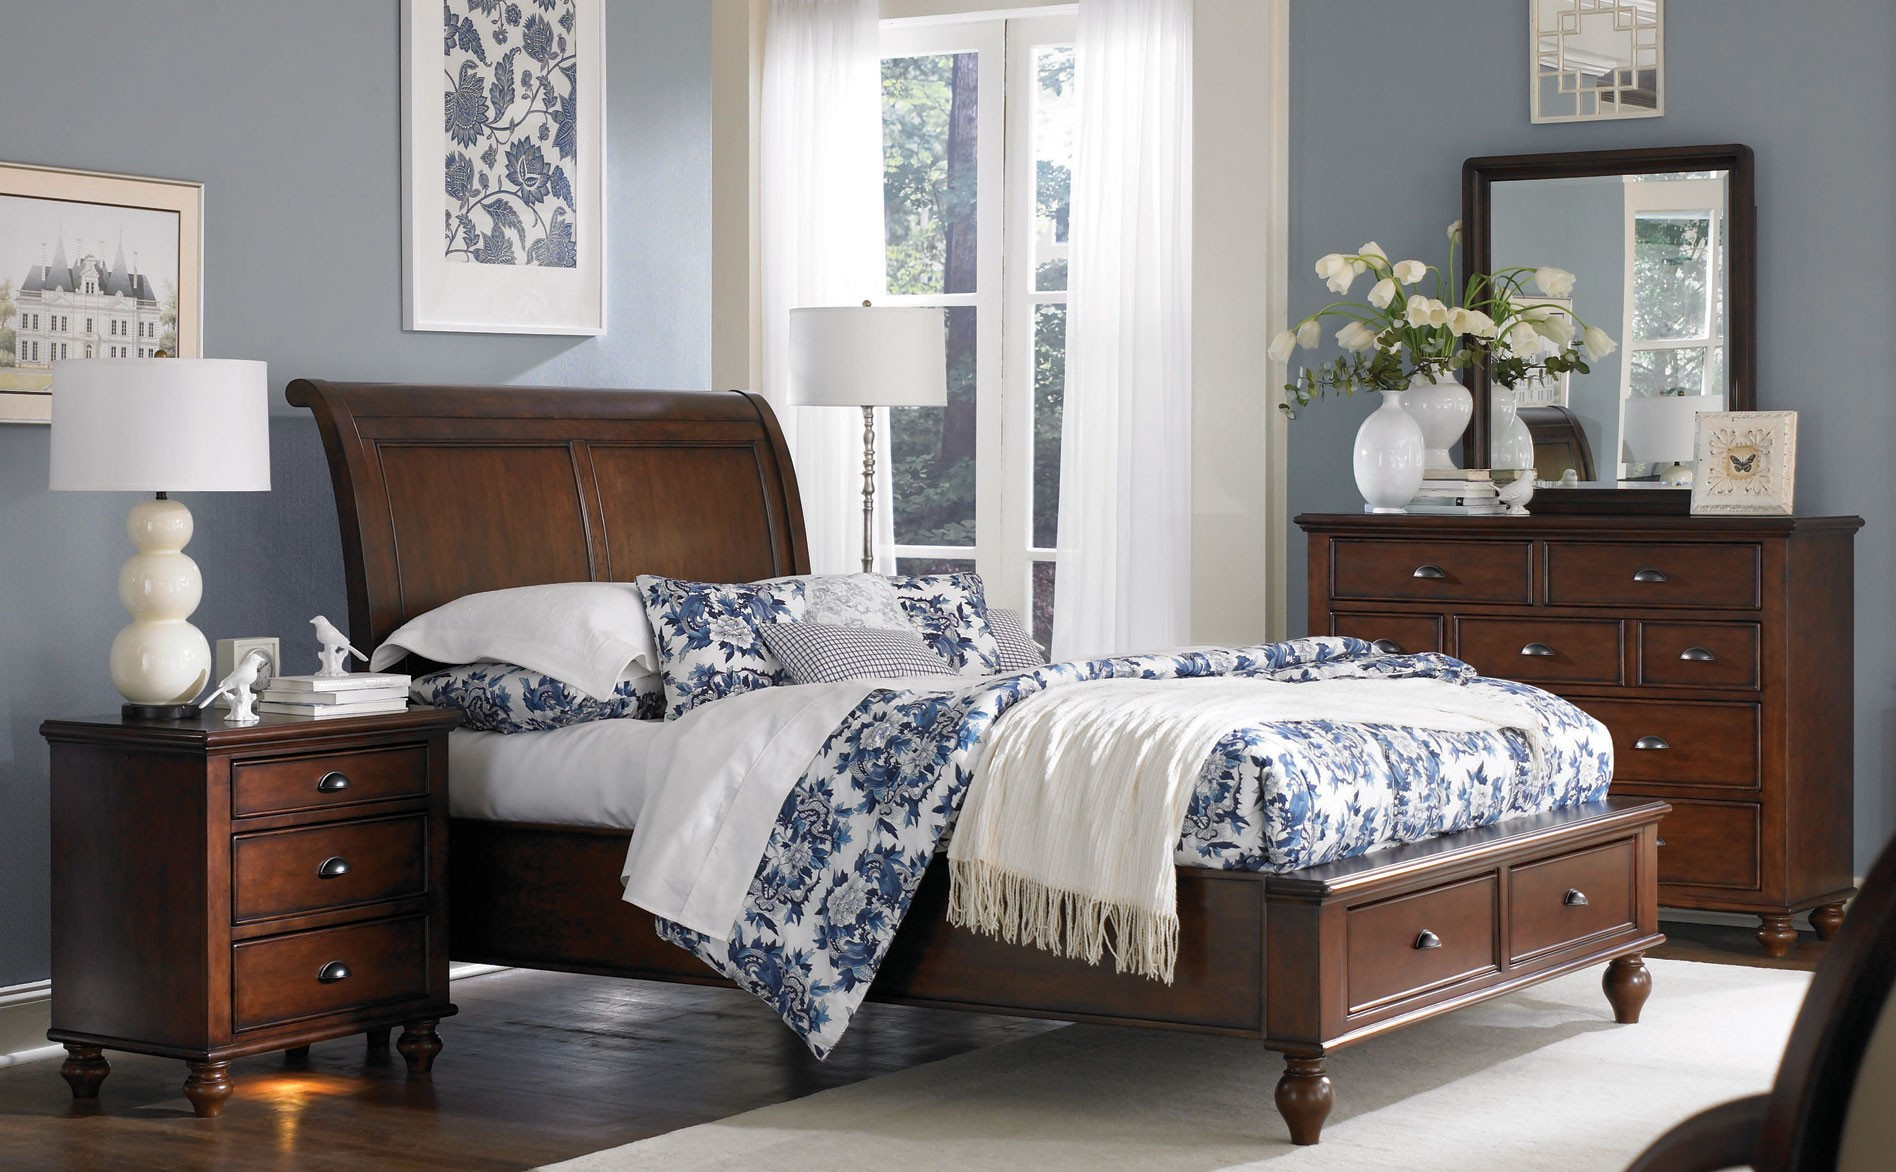 Master Bedroom Furniture Ideas
 Master Bedroom Ideas With Cherry Furniture HOME DELIGHTFUL